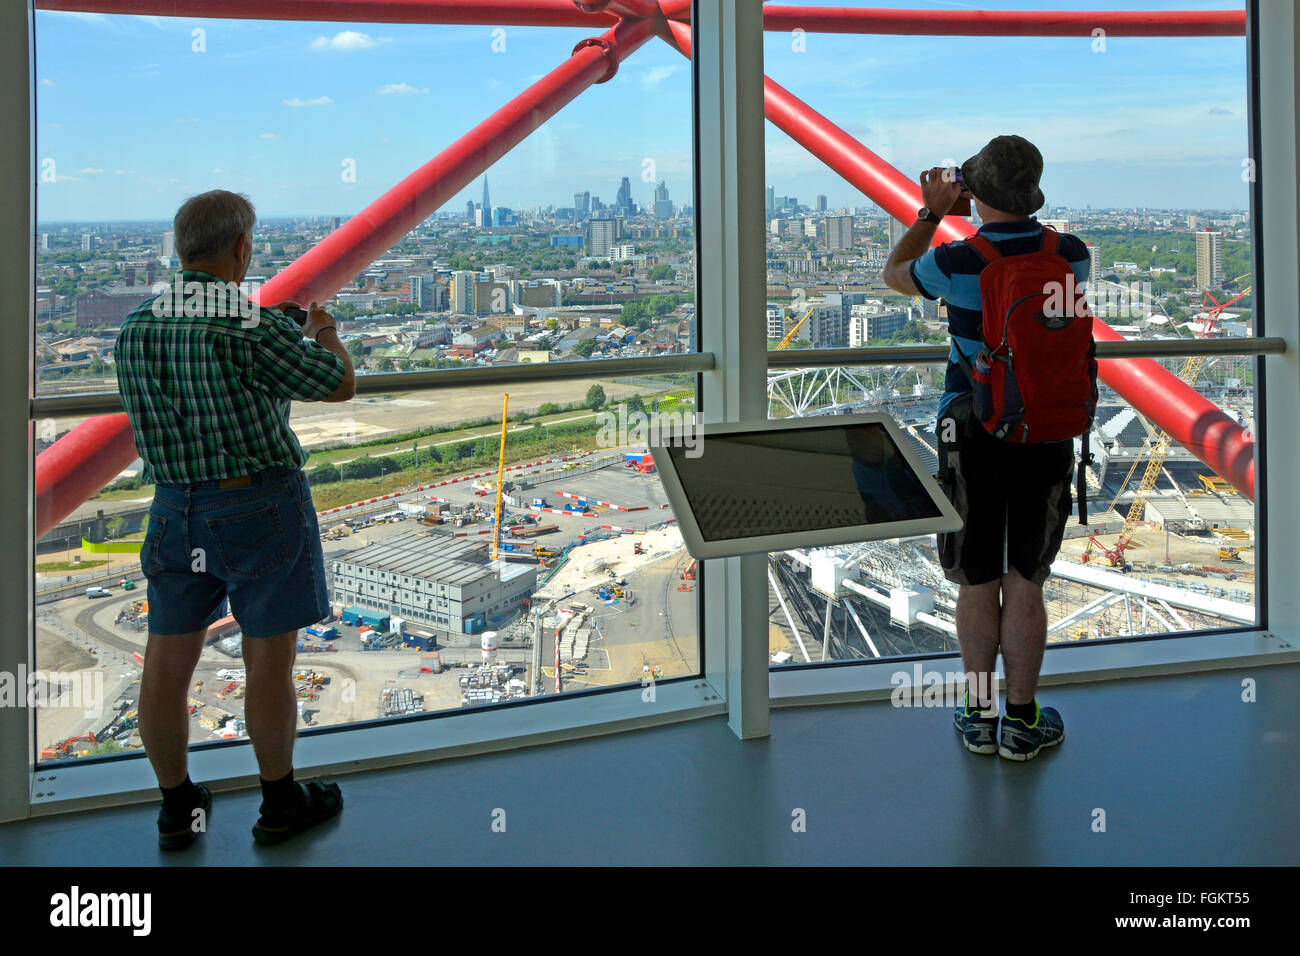 London skyline distant beyond East London urban landscape seen by visitors to Arcelor Mittal Orbit observation tower Queen Elizabeth Olympic Park UK Stock Photo